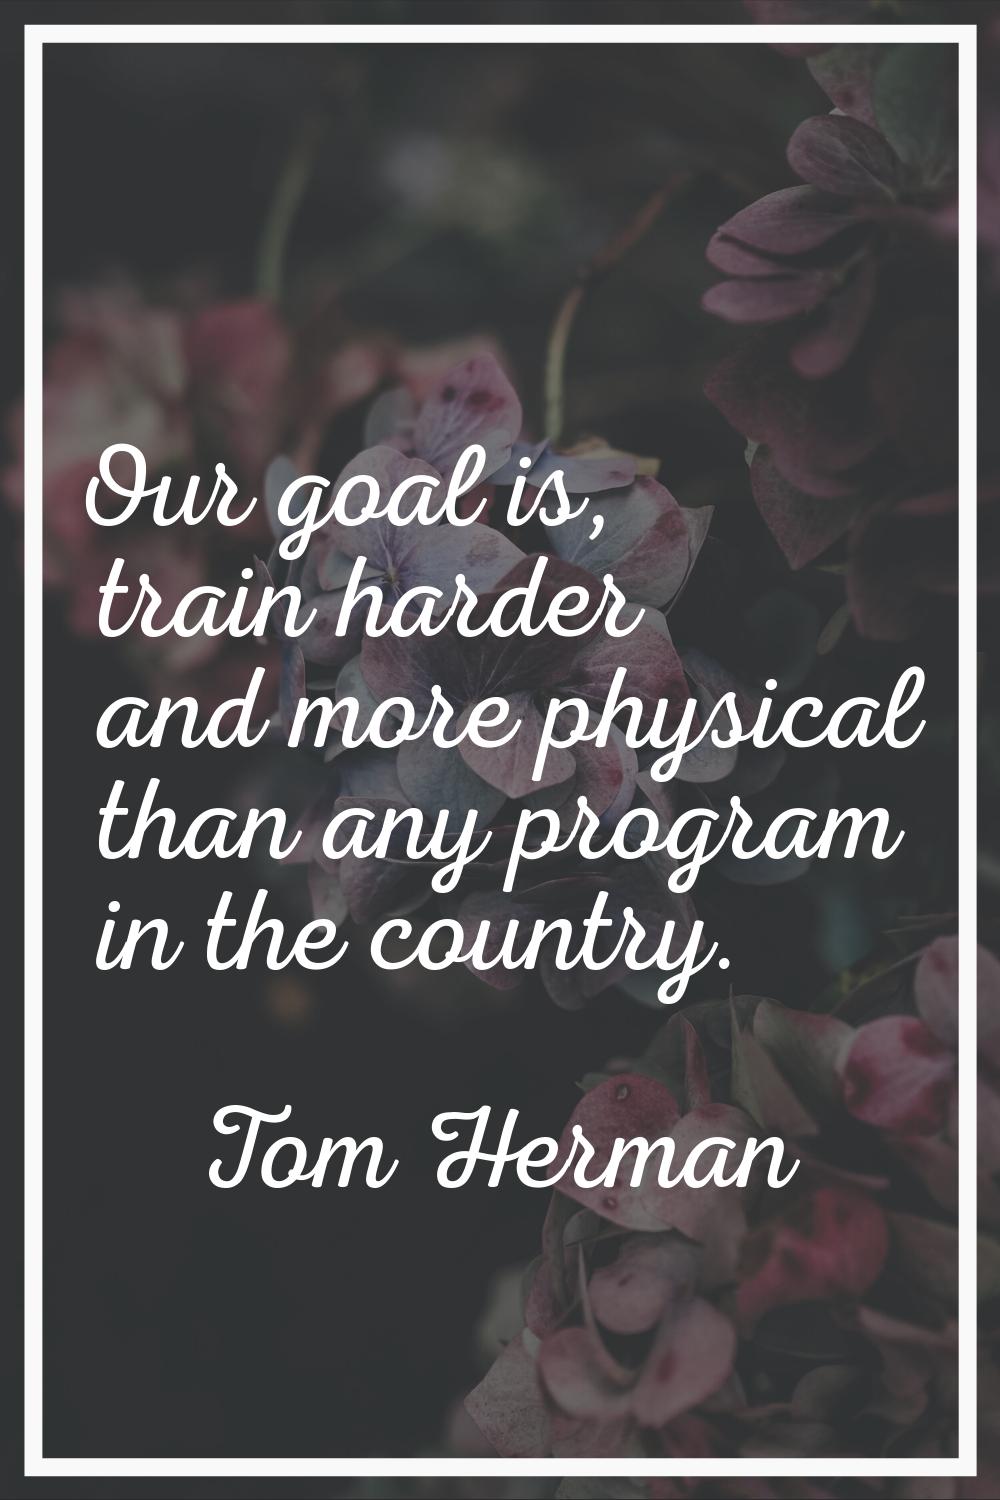 Our goal is, train harder and more physical than any program in the country.